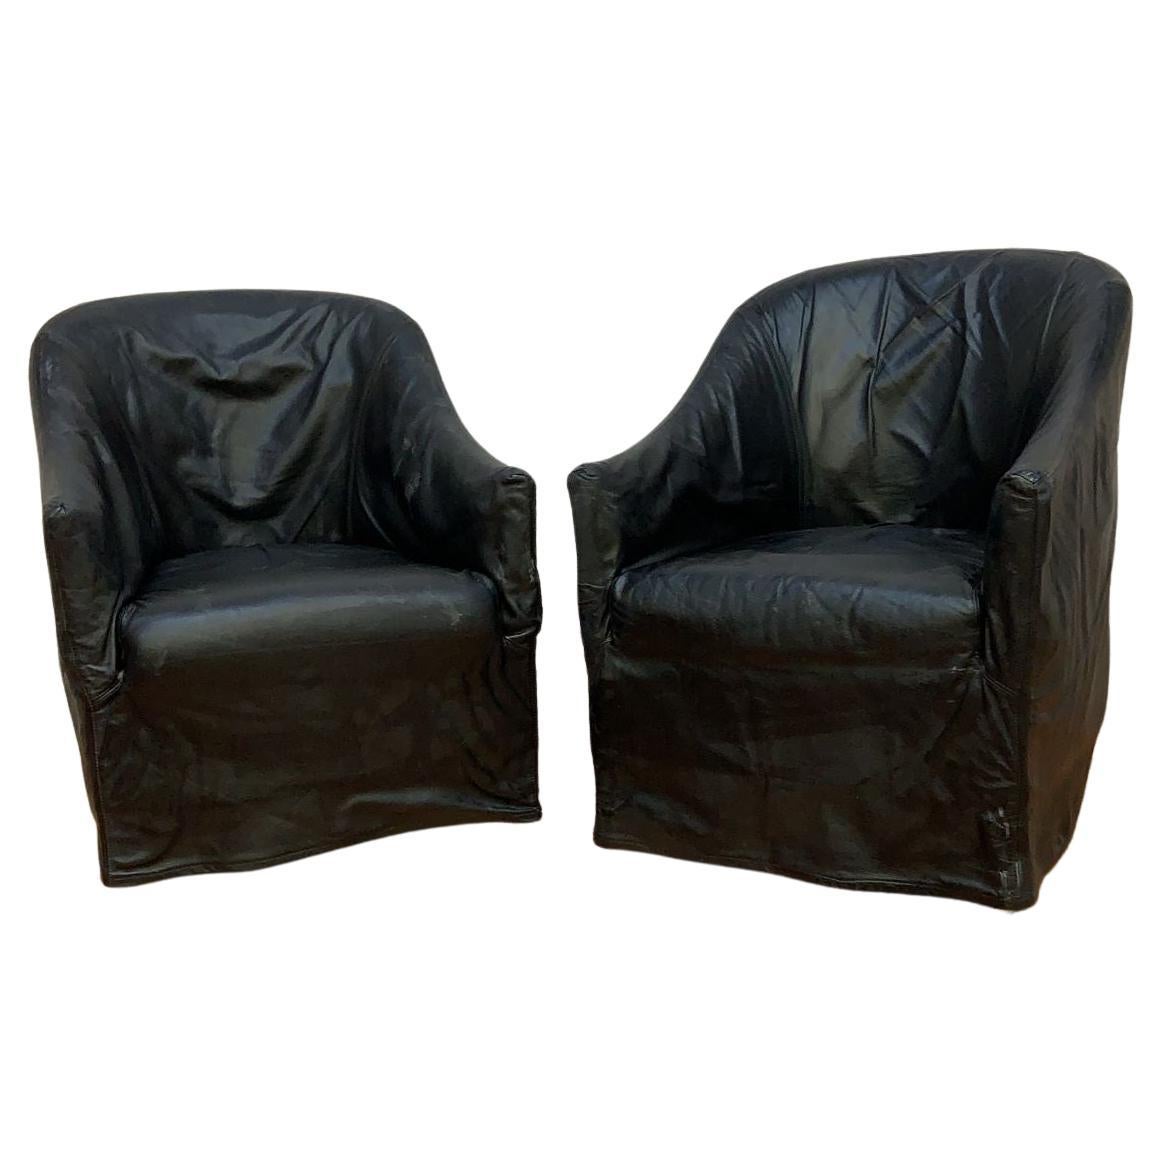 Fitted Black Italian Draped Leather Barrel Back Club Chairs by Niedermaier, Pair For Sale